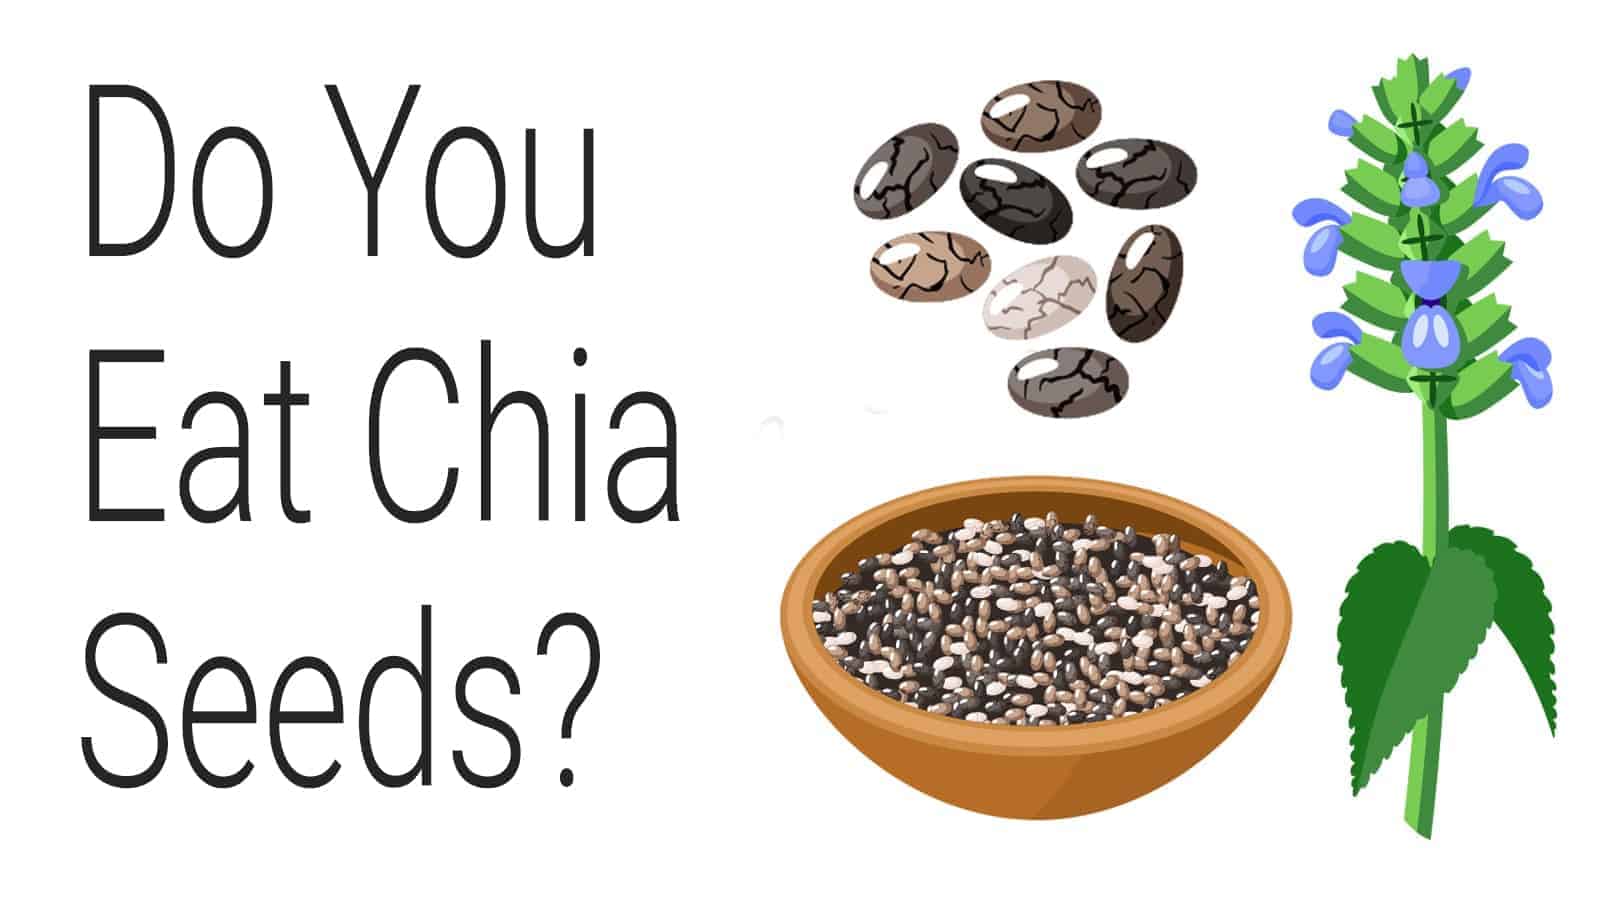 Science Explains 15 Things That Happen to Your Body When You Eat Chia Seeds